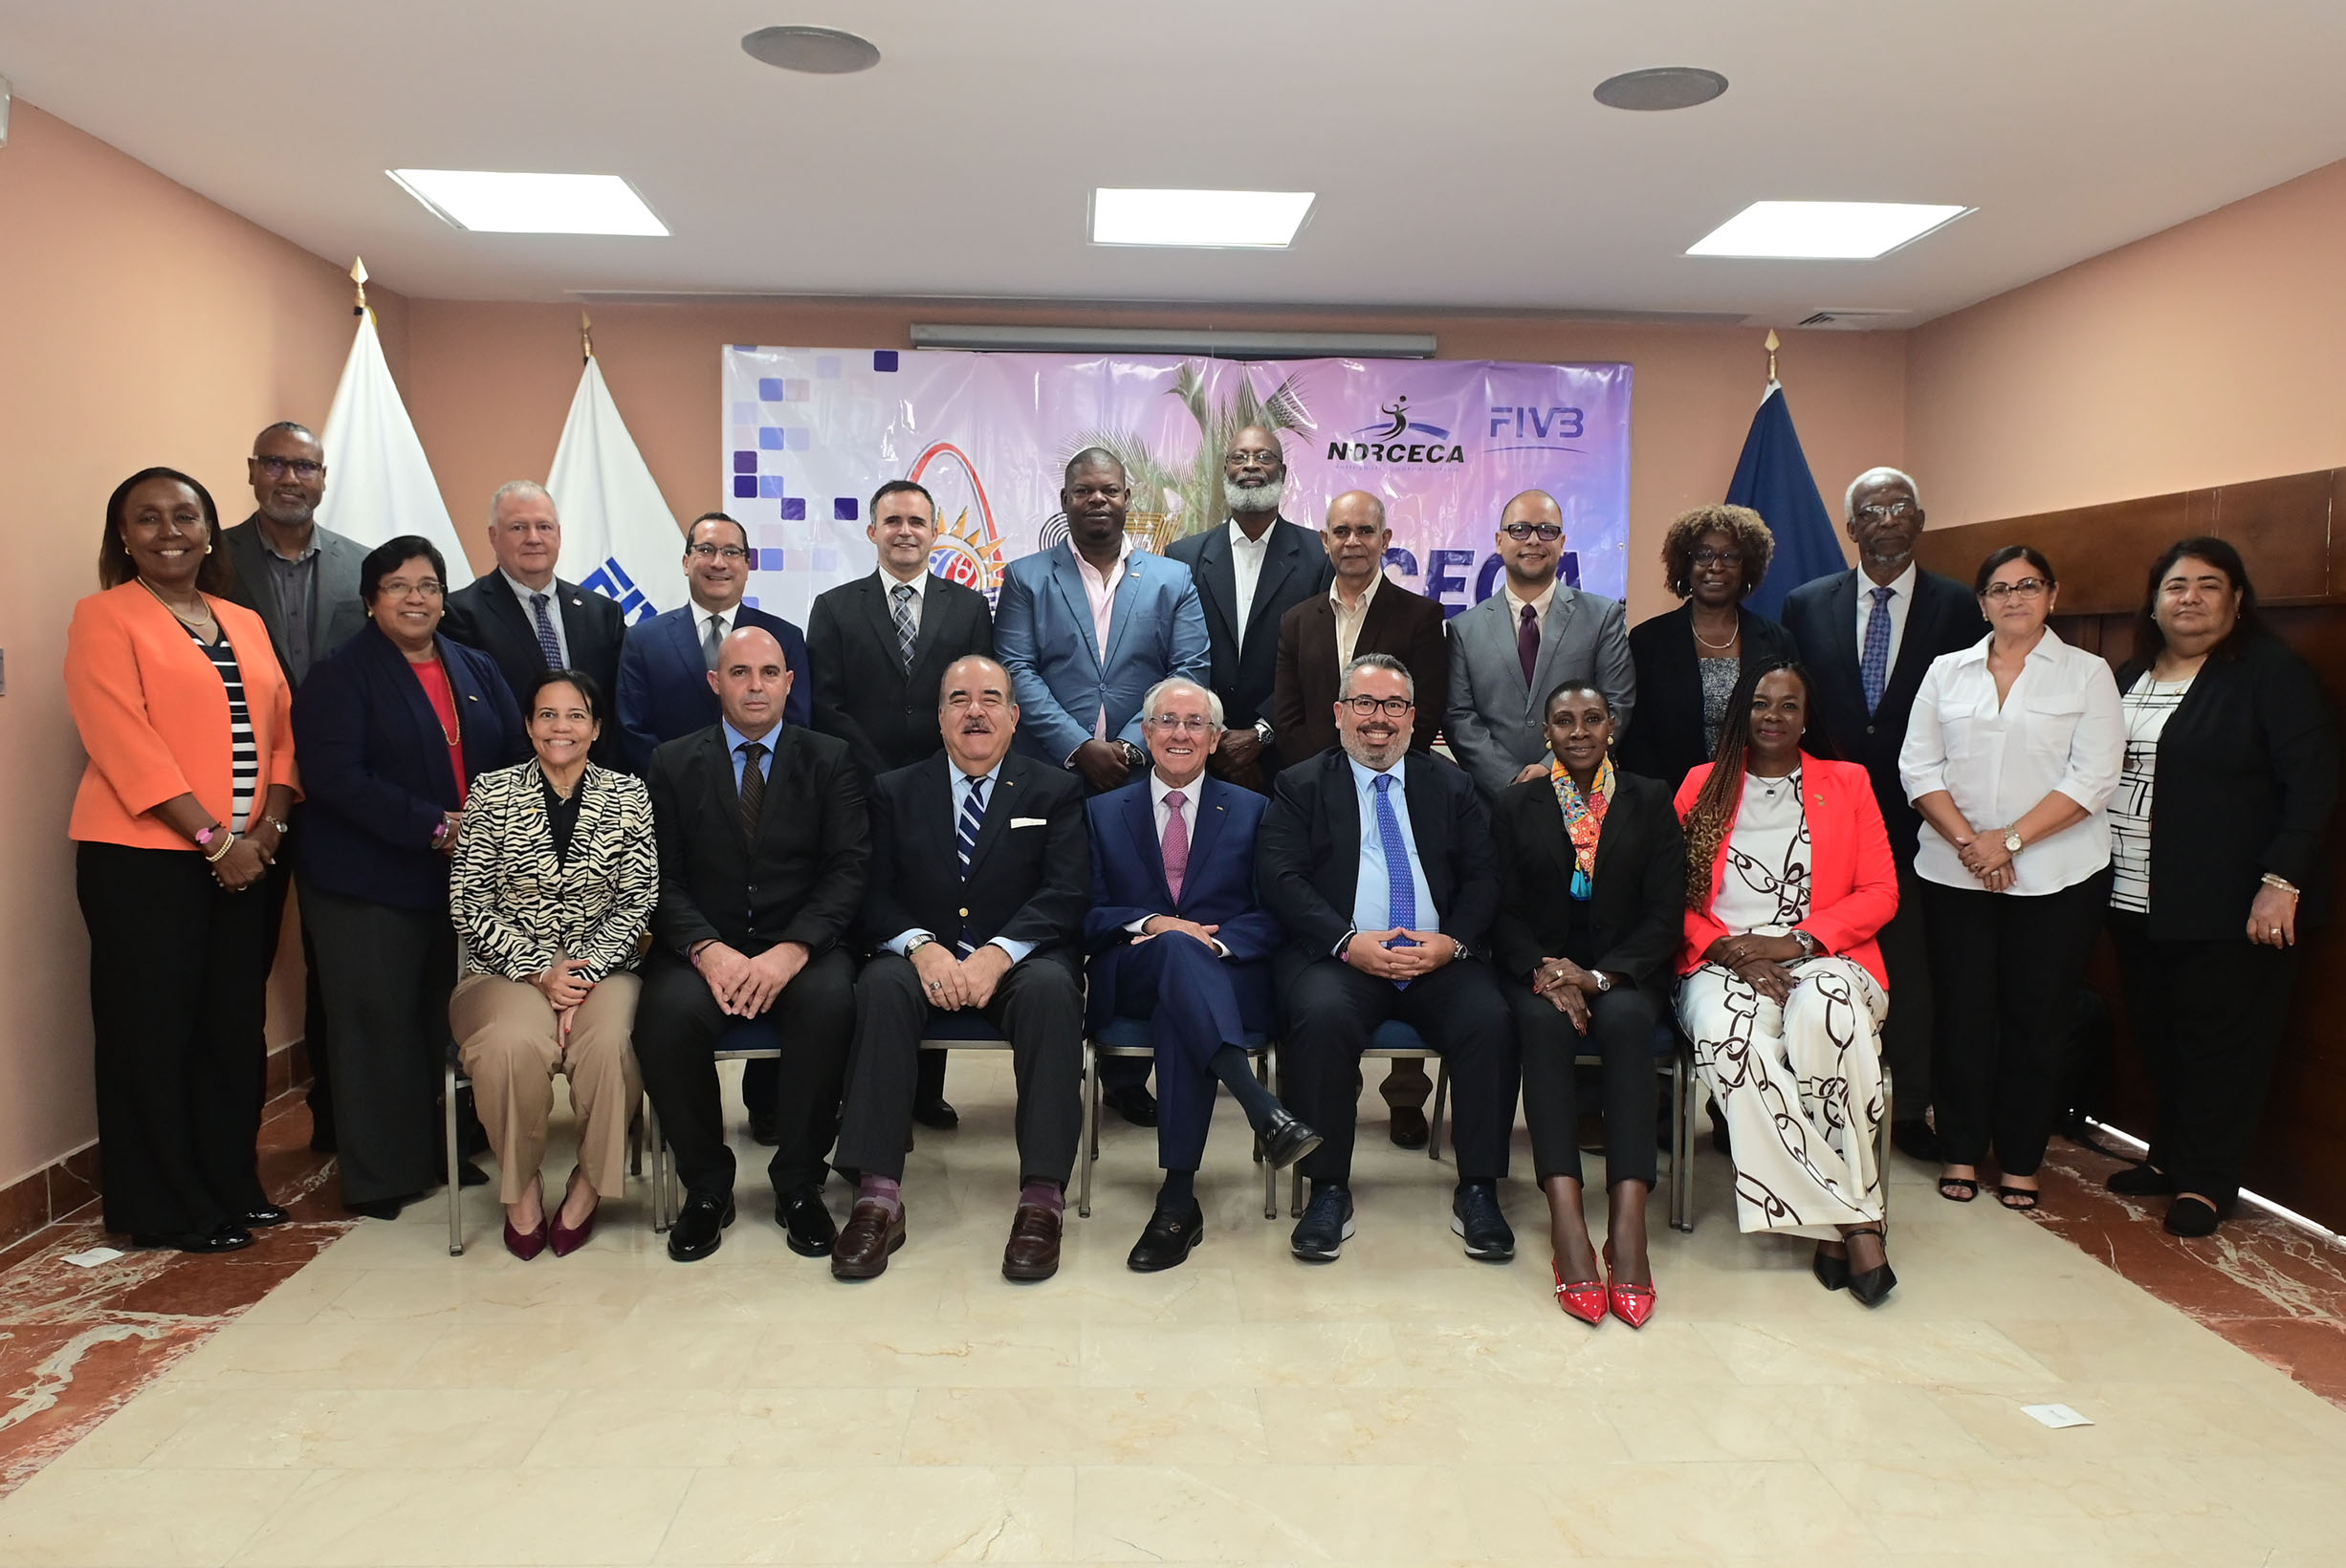 NORCECA Executive Committee and Board of Administration Extraordinary Meeting: Charting a New Course